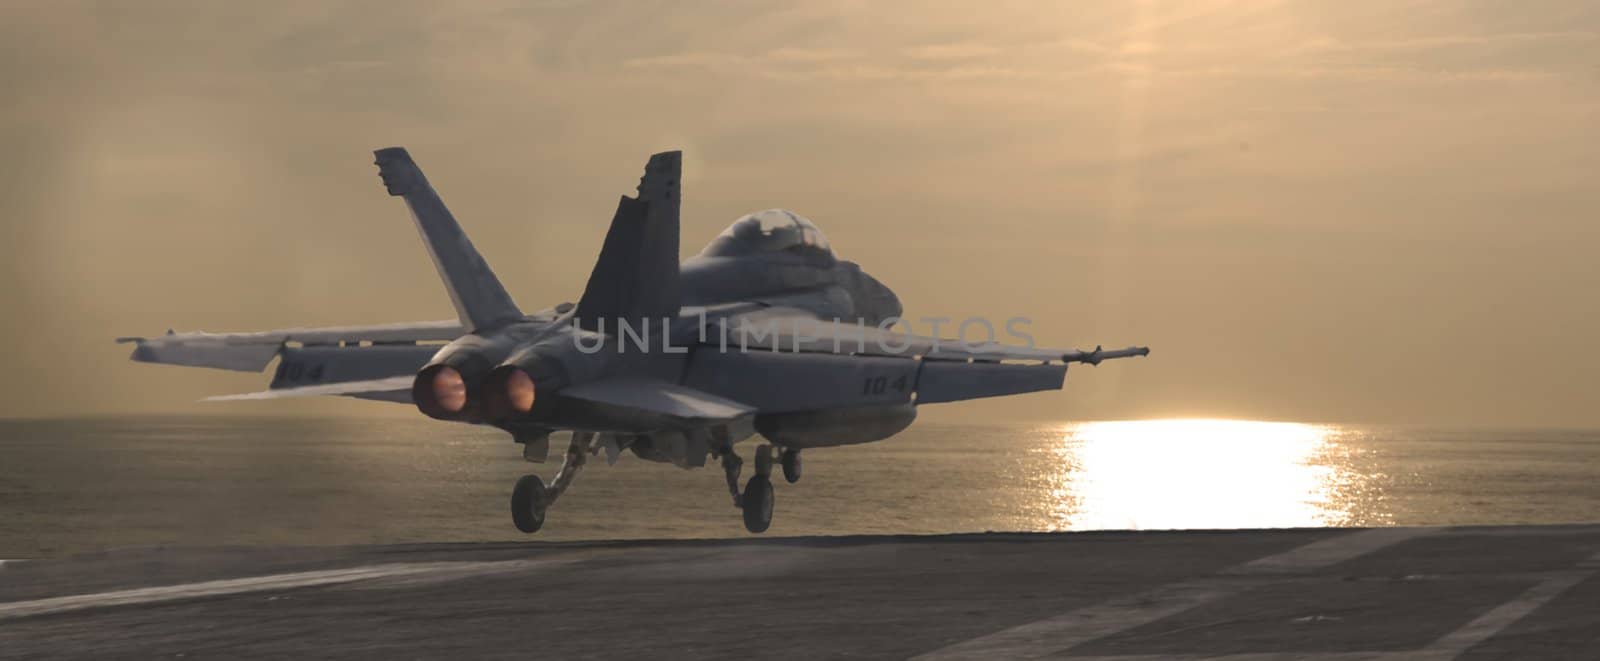 An F-18 Super Hornet is launched from a nuclear powered aircraft carrier at sunset